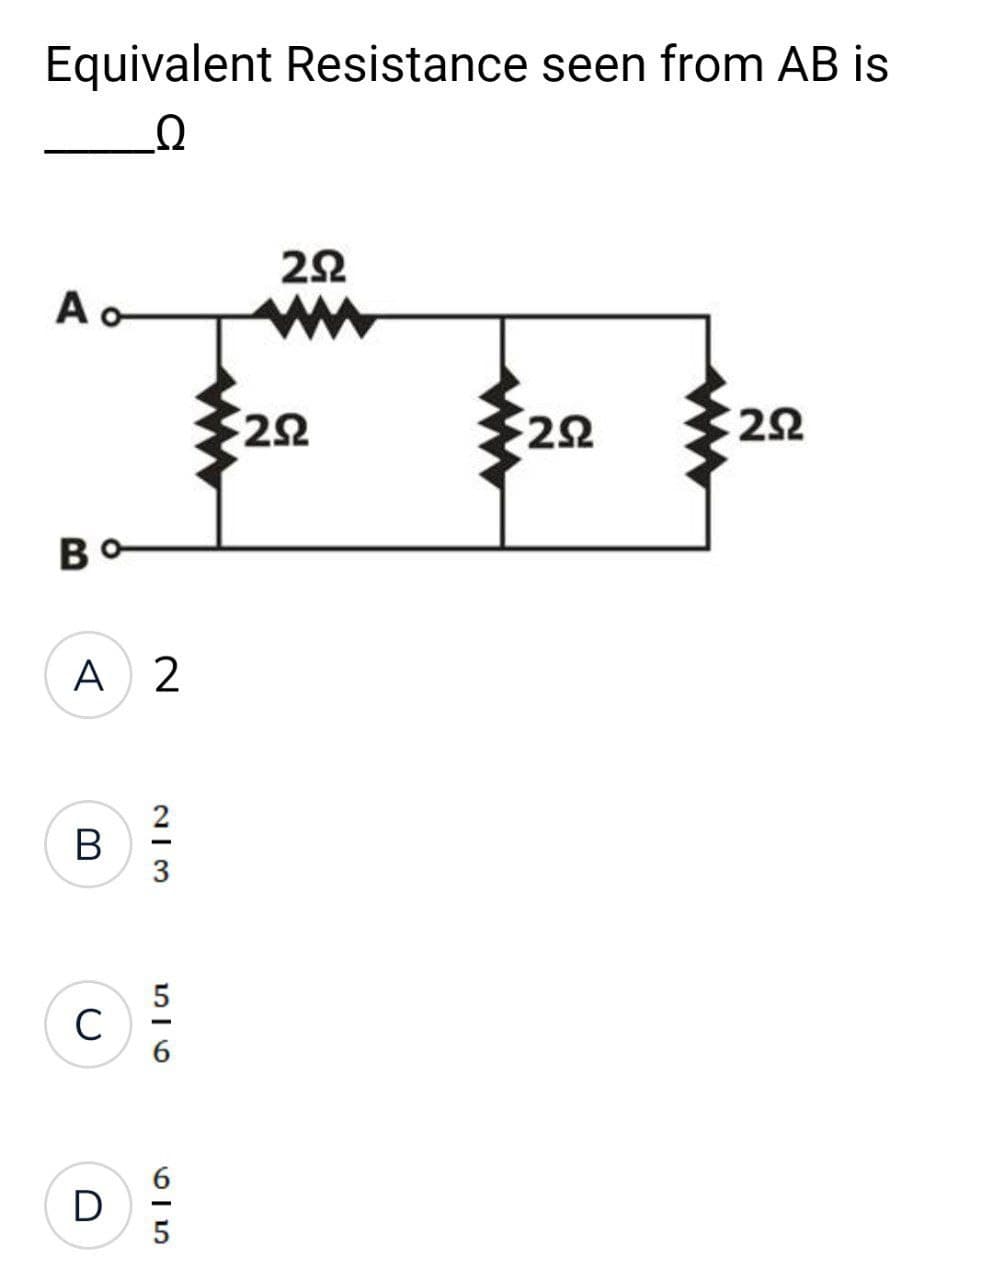 Equivalent Resistance seen from AB is
Q
A o
B
A 2
B
C
D
2|3
516
615
292
292
292
€292